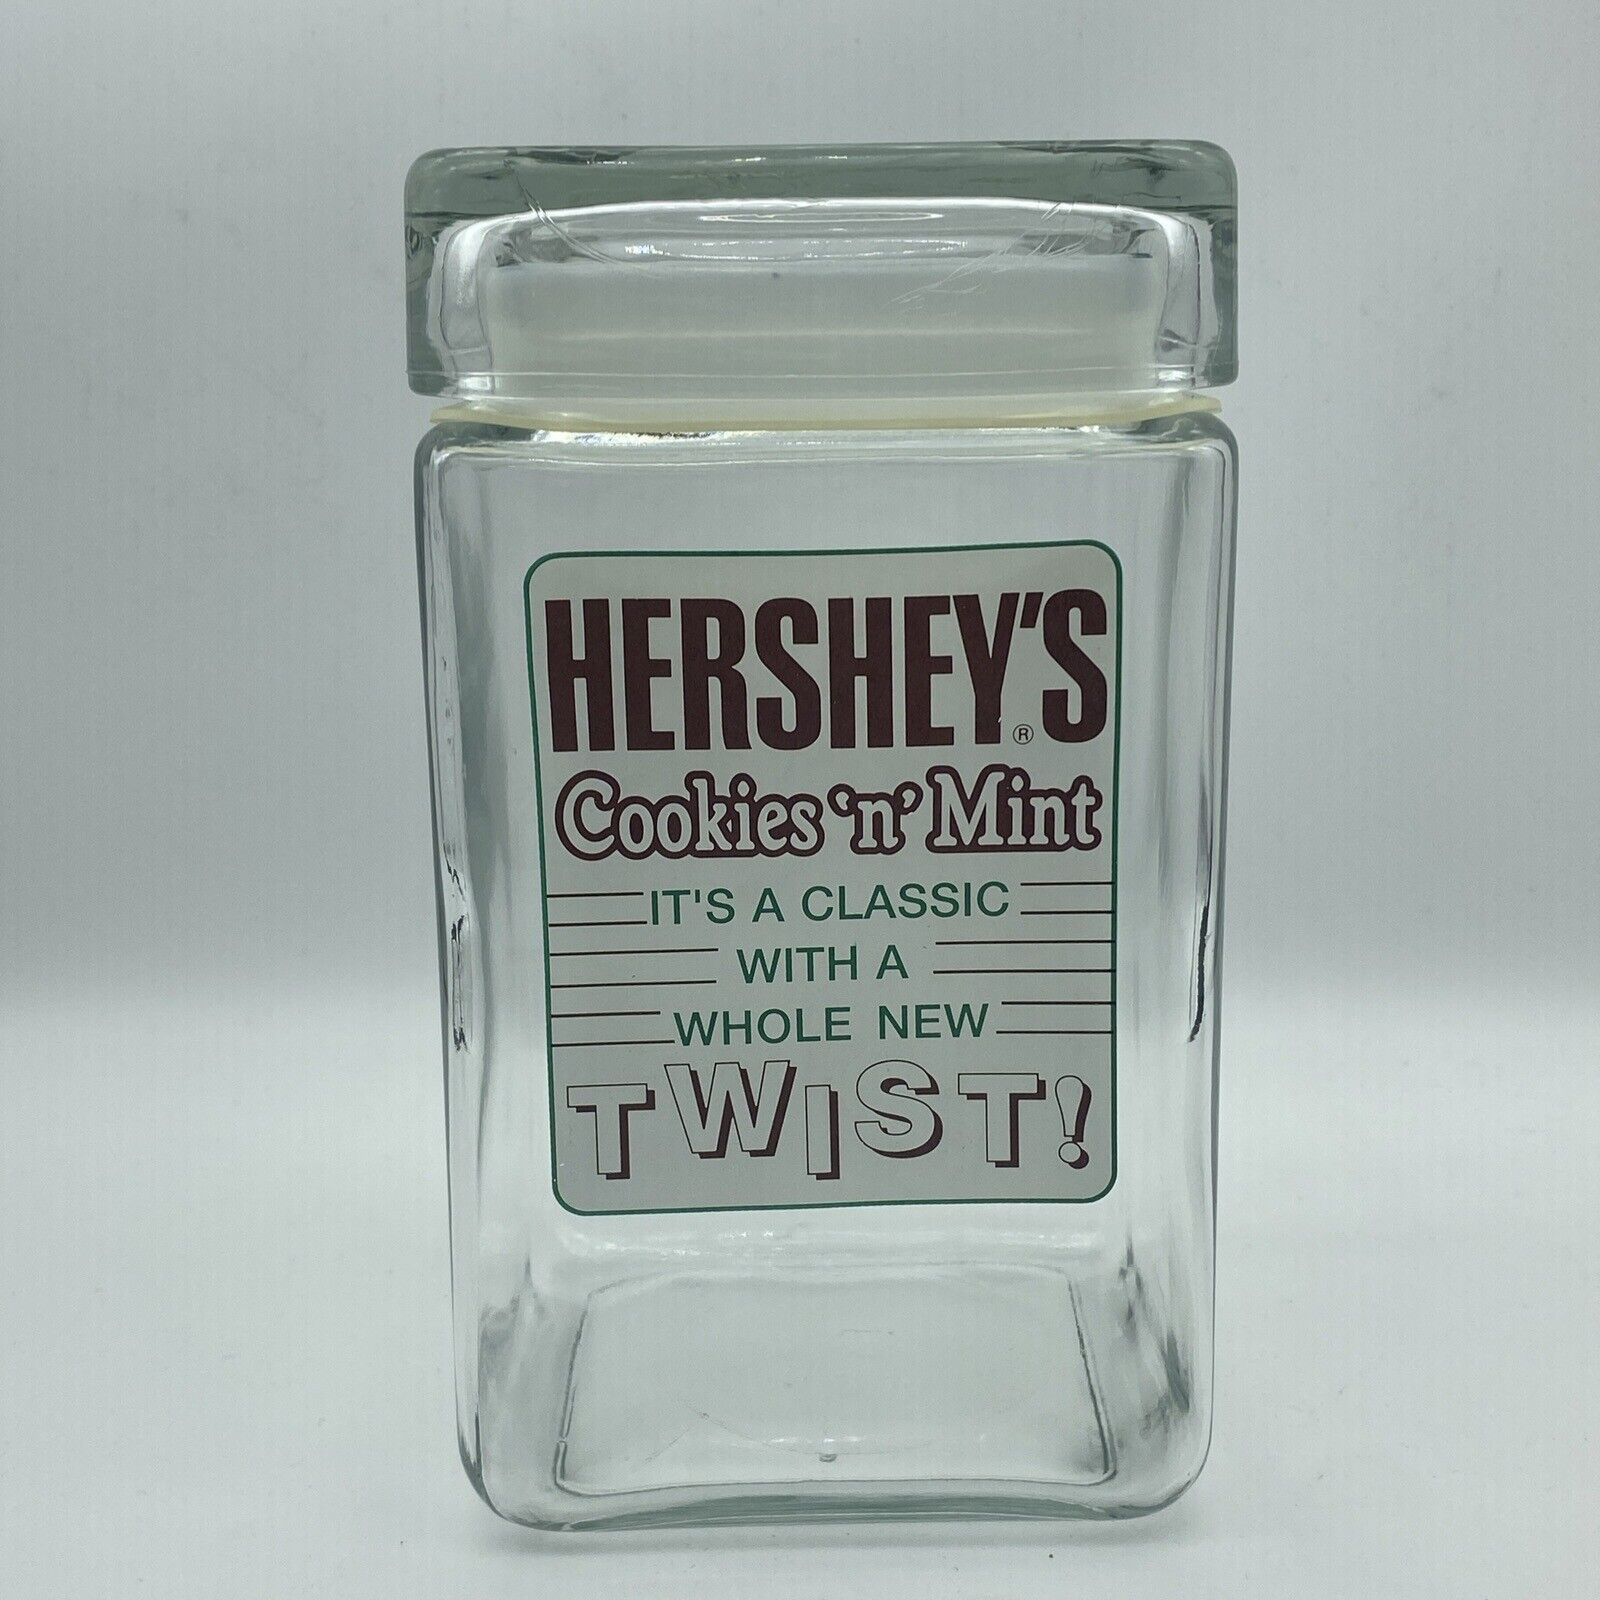 Hershey's Cookies 'n' Mint Candy Bar Advertising Jar Canister Vintage 1990s T3